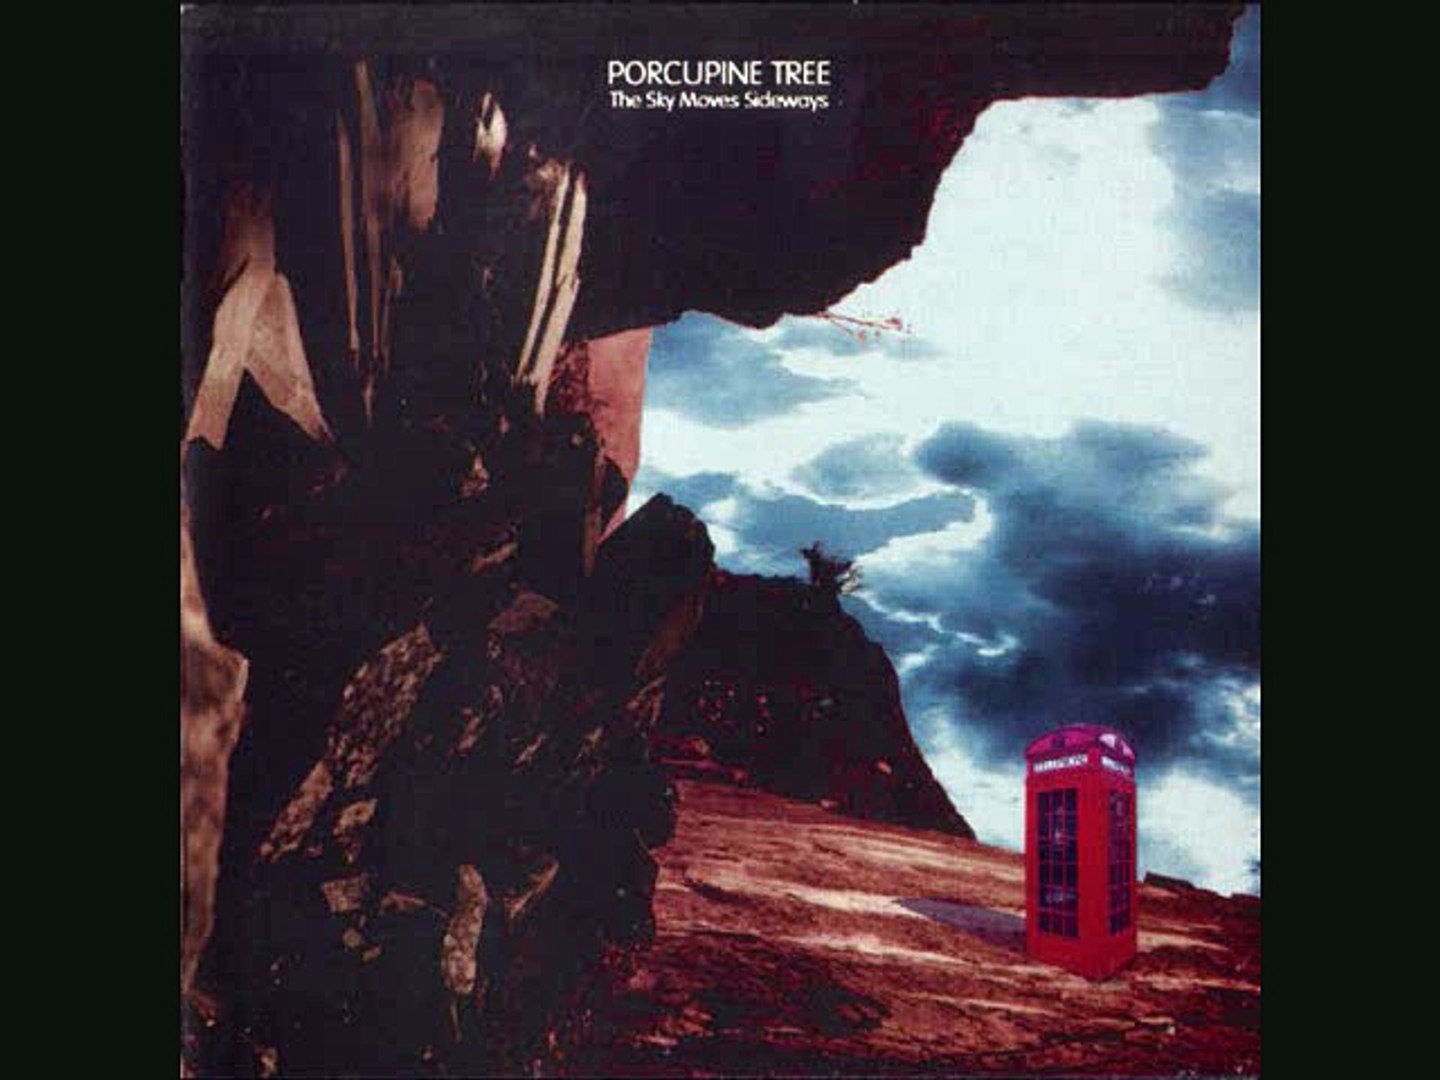 PORCUPINE TREE- *THE SKY MOVES SIDEWAYS* - The Sky Moves Sideways Phase 1